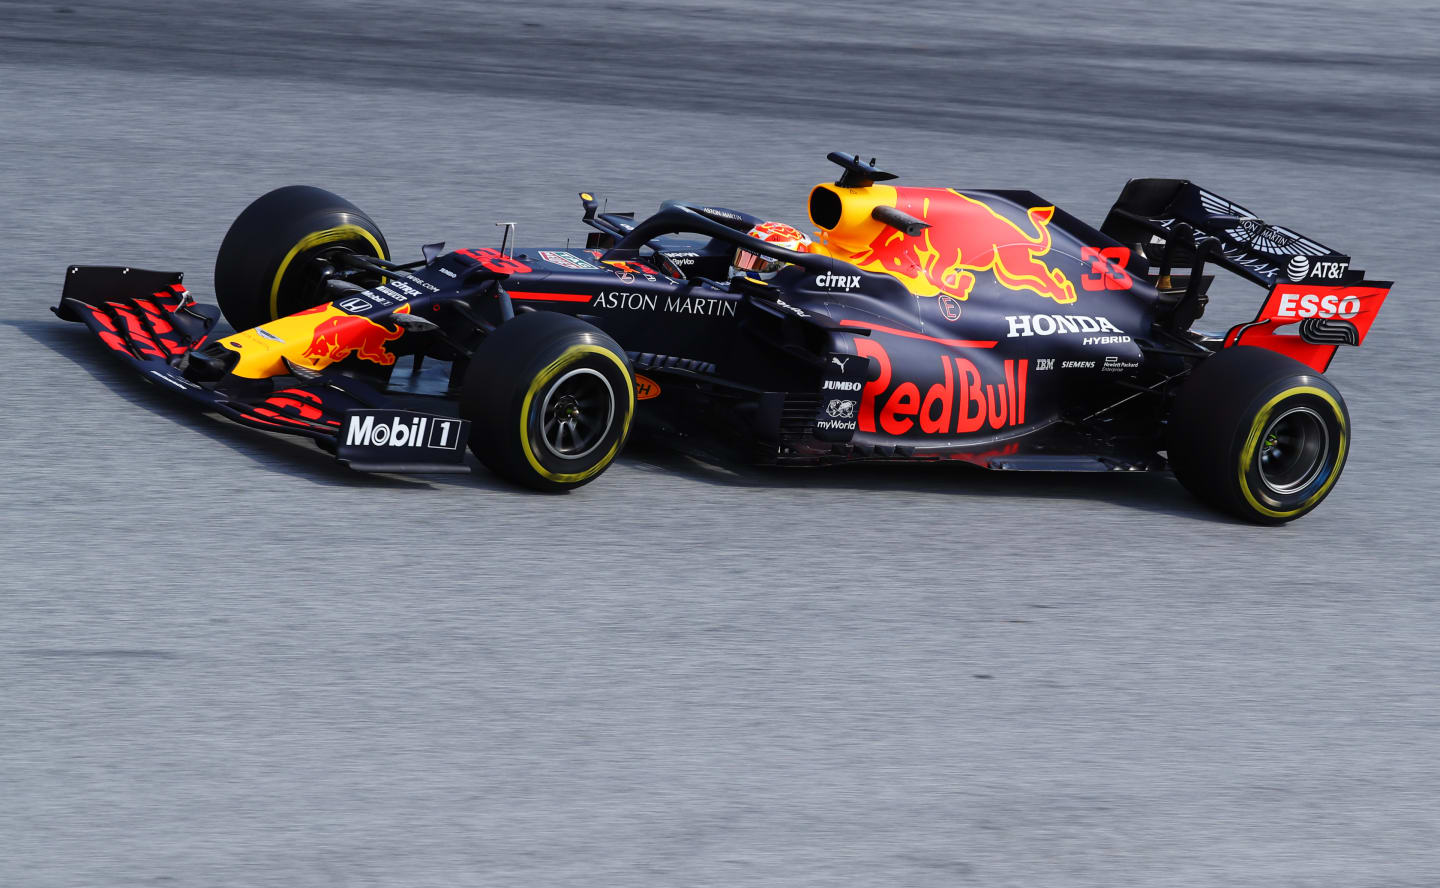 SPIELBERG, AUSTRIA - JULY 10: Max Verstappen of the Netherlands driving the (33) Aston Martin Red Bull Racing RB16 on track during practice for the F1 Grand Prix of Styria at Red Bull Ring on July 10, 2020 in Spielberg, Austria. (Photo by Mark Thompson/Getty Images)